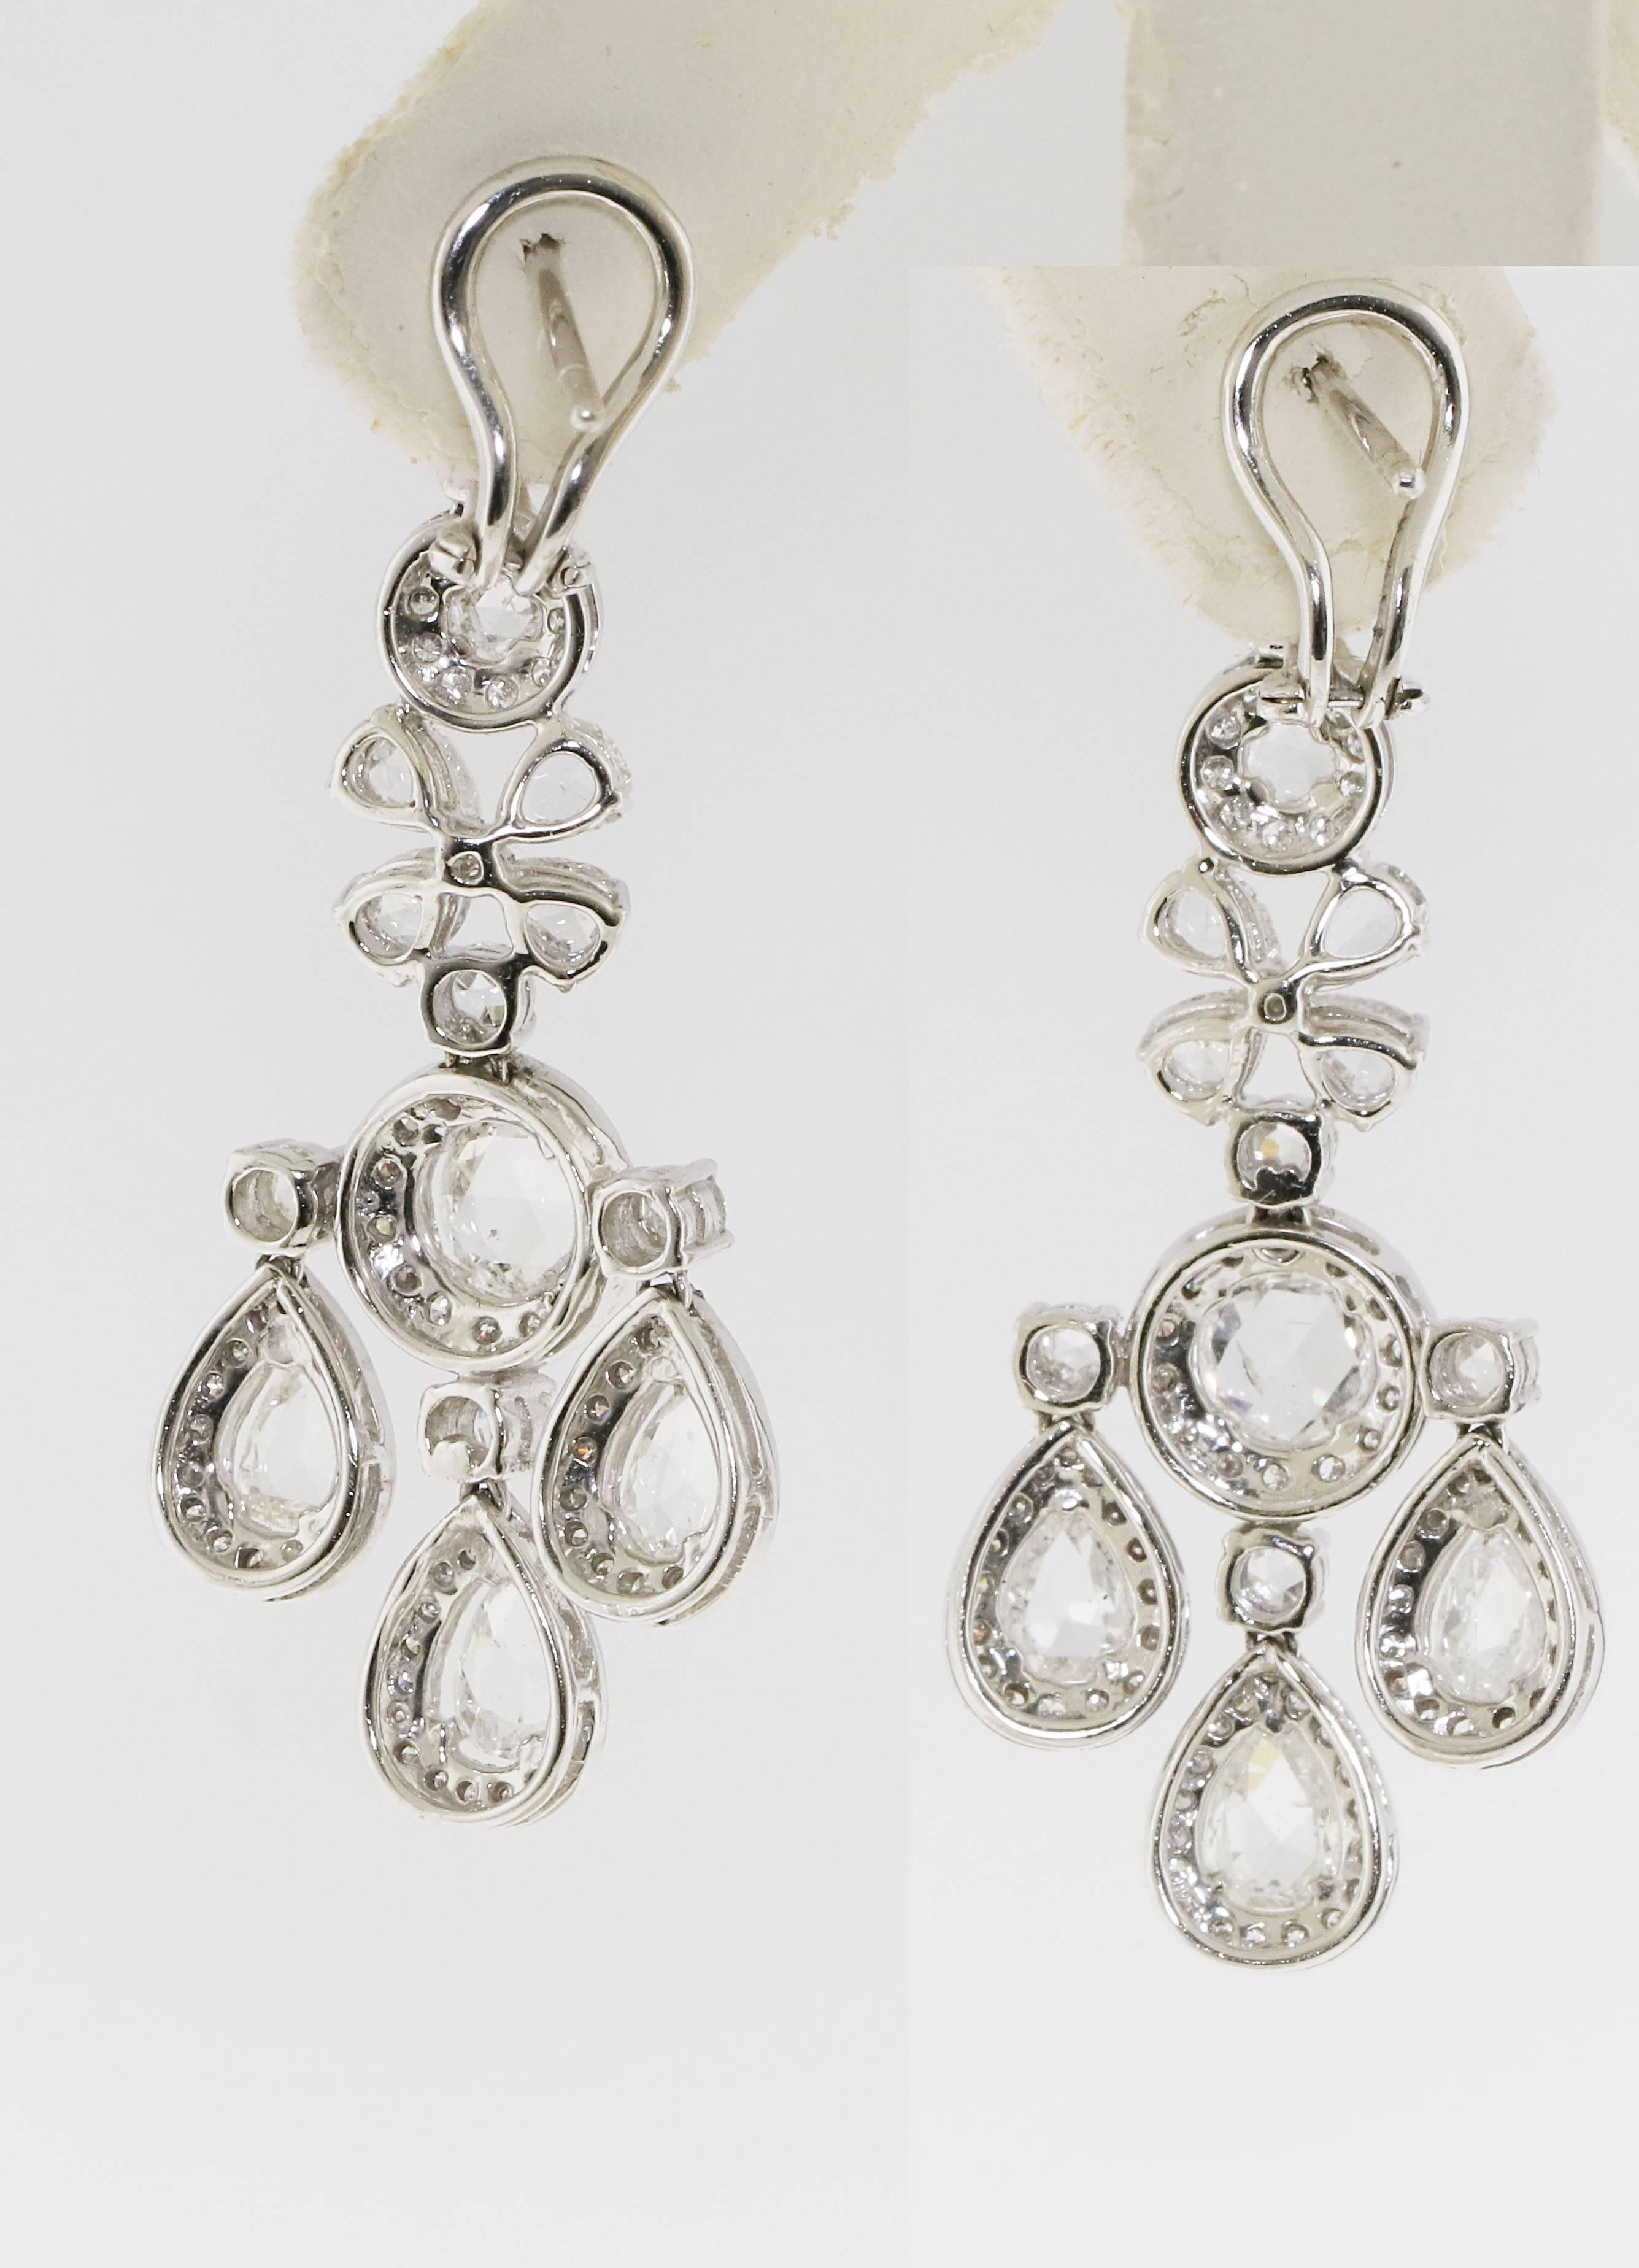 Gorgeous dangle chandelier diamond earrings. Known weight of 6.91 carats of white clean rose cut diamonds. These earrings are beautiful. They are long enough to be worn for a fancy black tie event, but fun enough to wear everyday. The perfect pair